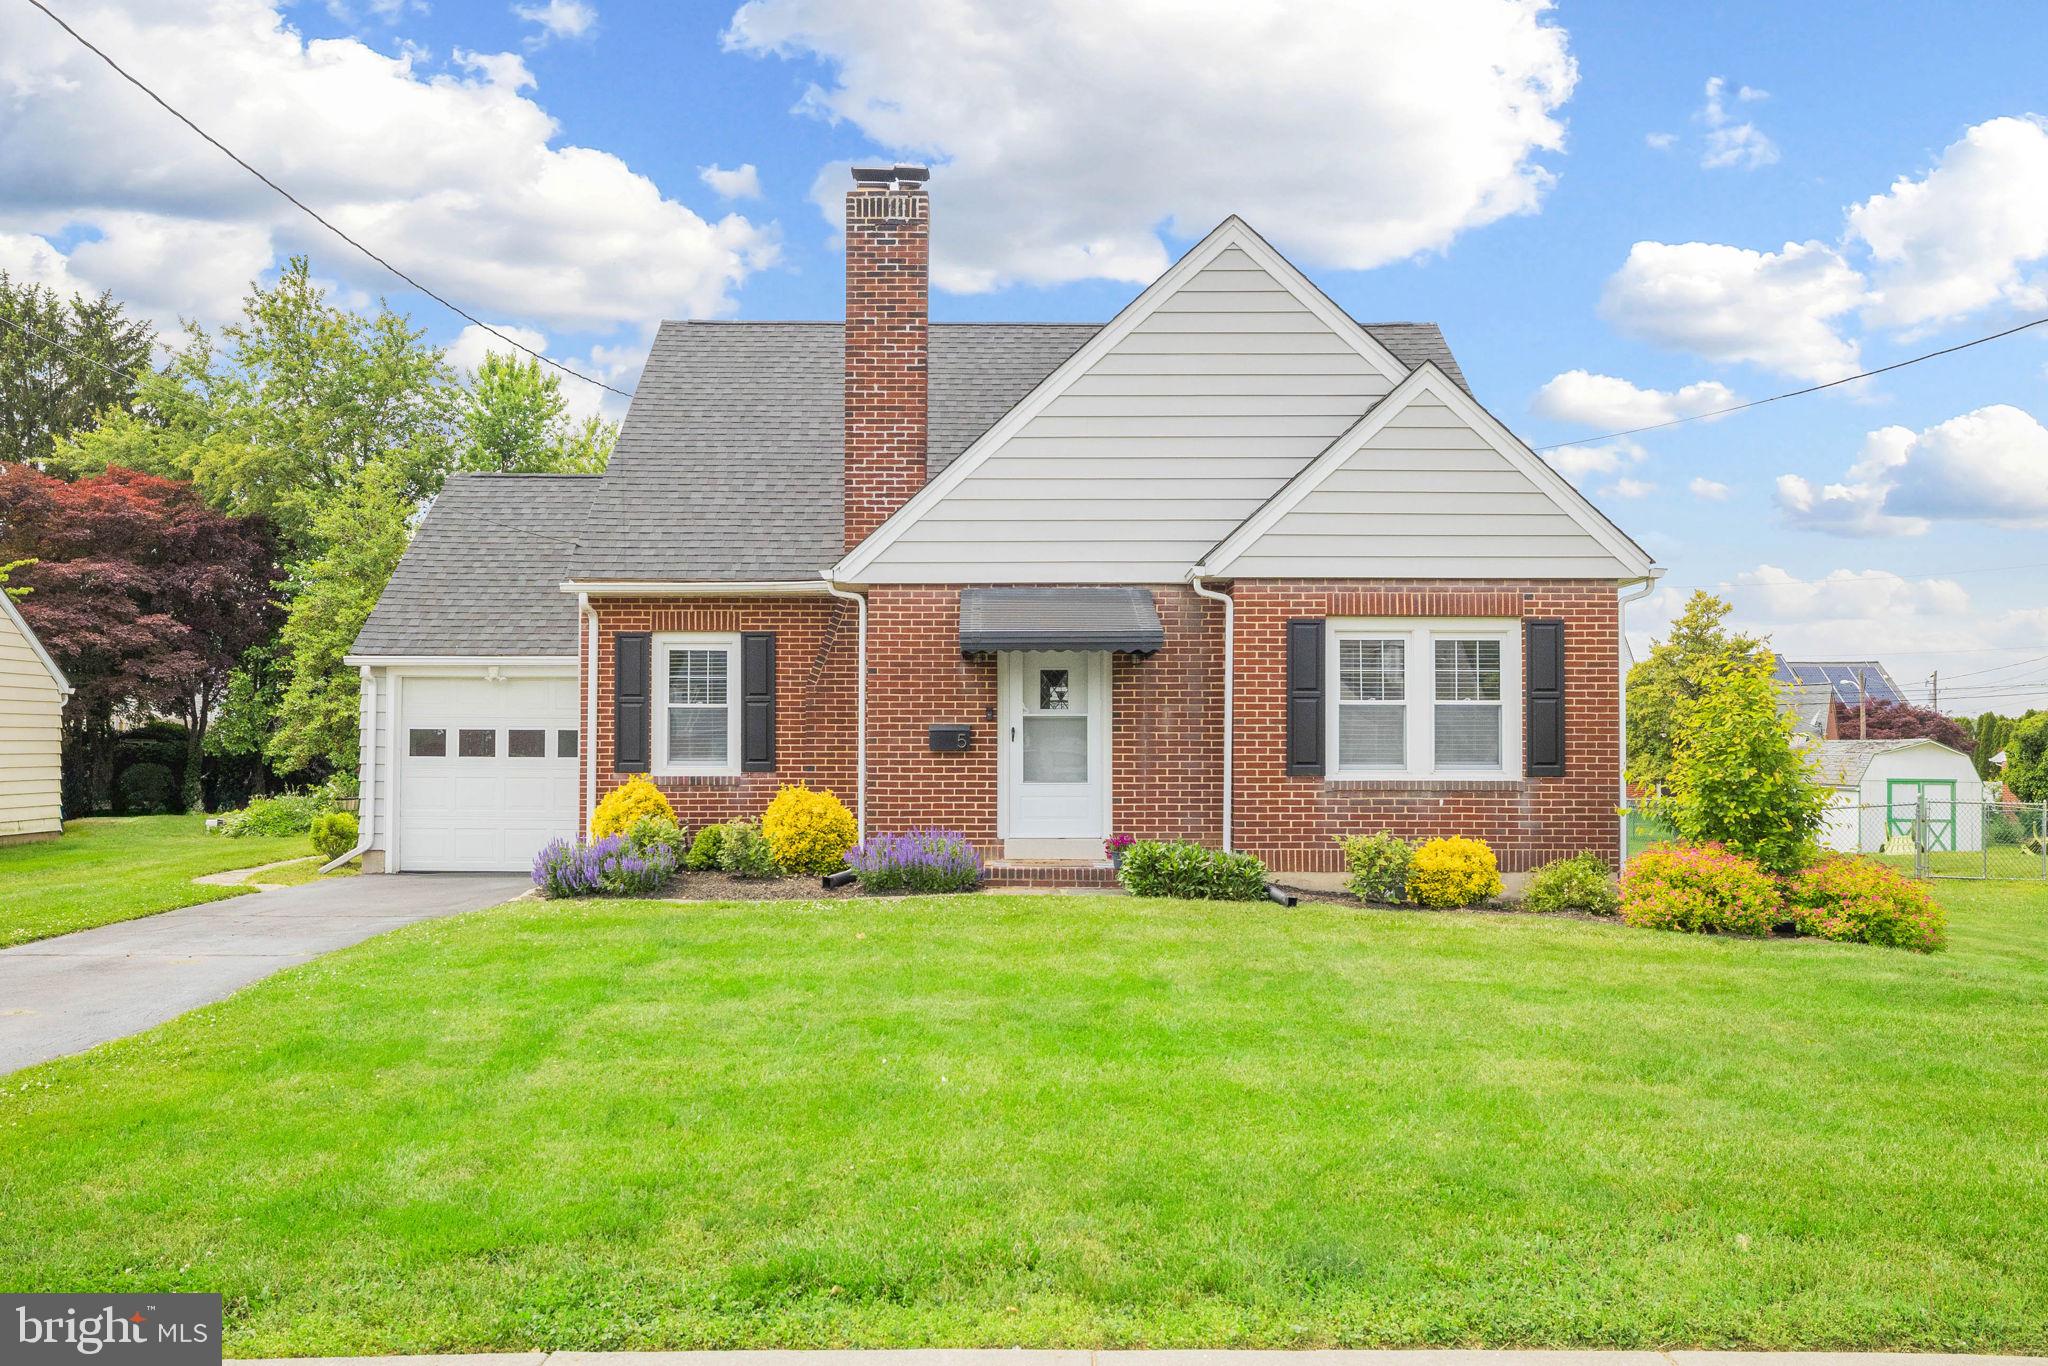 You can't help but fall in love with the curb appeal of this charming Cape Cod home! 

Stepping thro